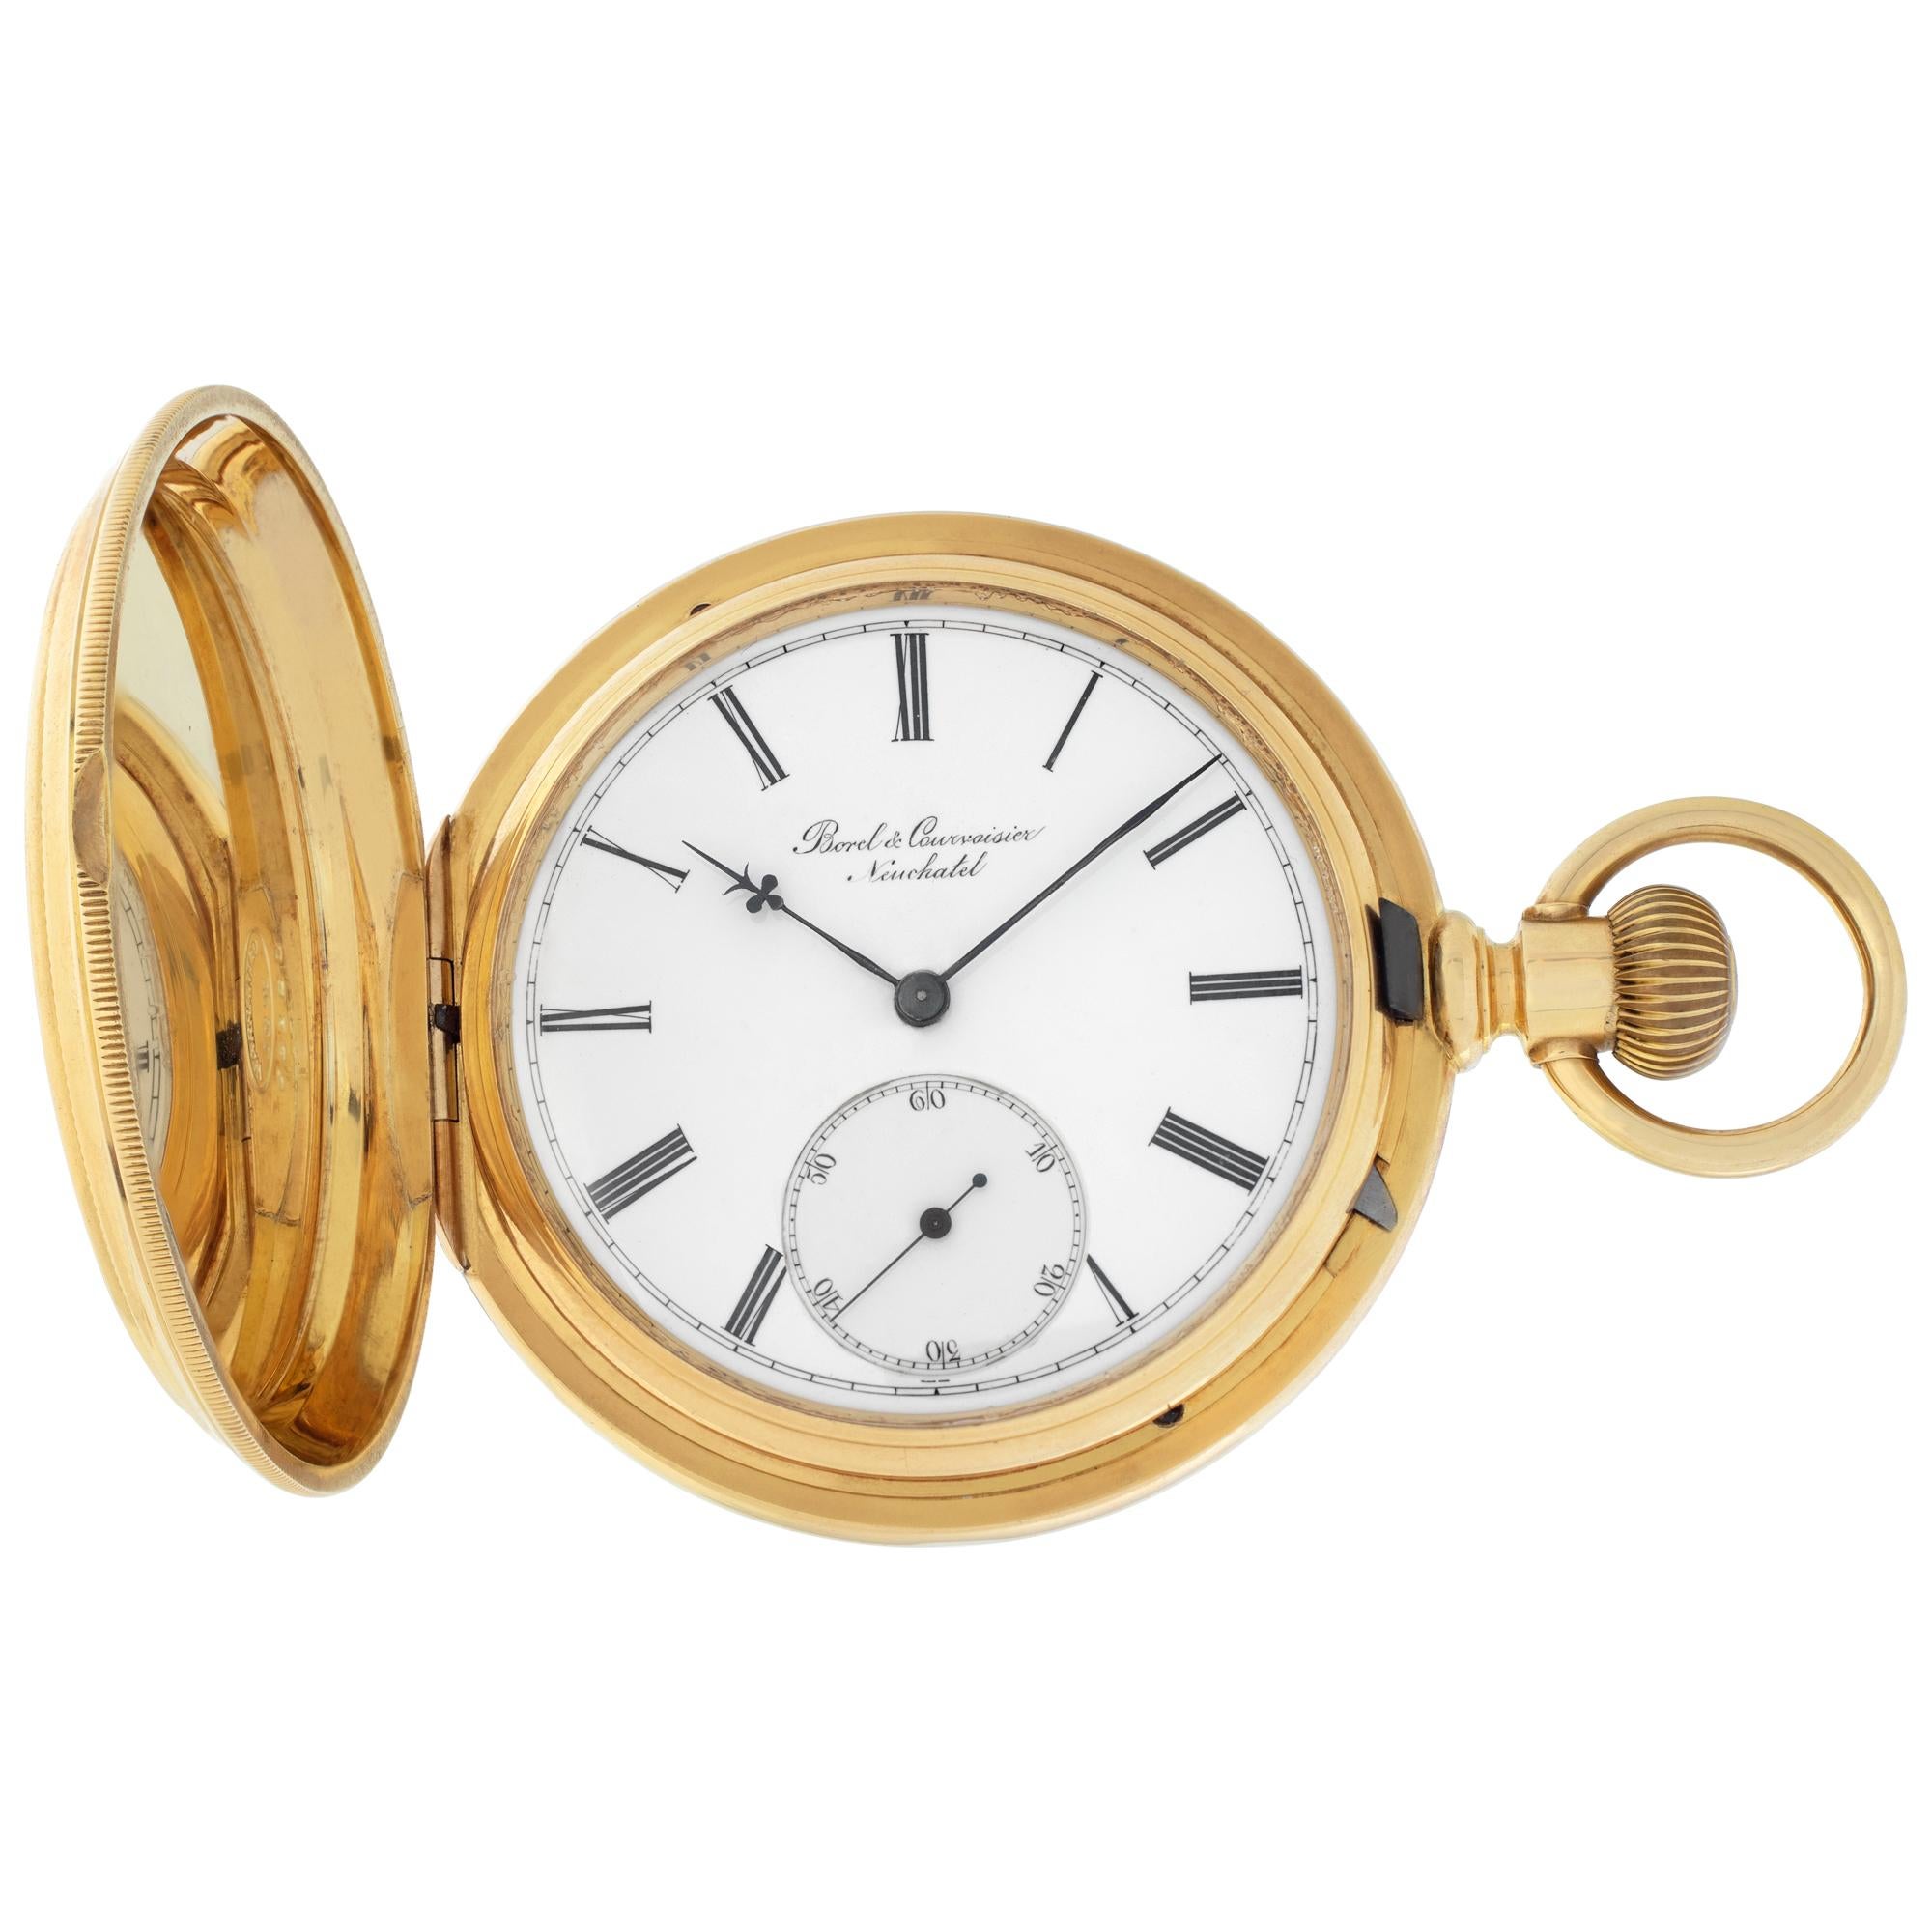 Borel & Courvoisier high grade Neuchatel Swiss hunting case pocket watch in 18k with Breguet hairspring. Manual w/ subseconds. Circa 1890. Fine Pre-owned Borel & Courvoiser Watch. Certified preowned Vintage Borel & Courvoiser pocket watch watch is